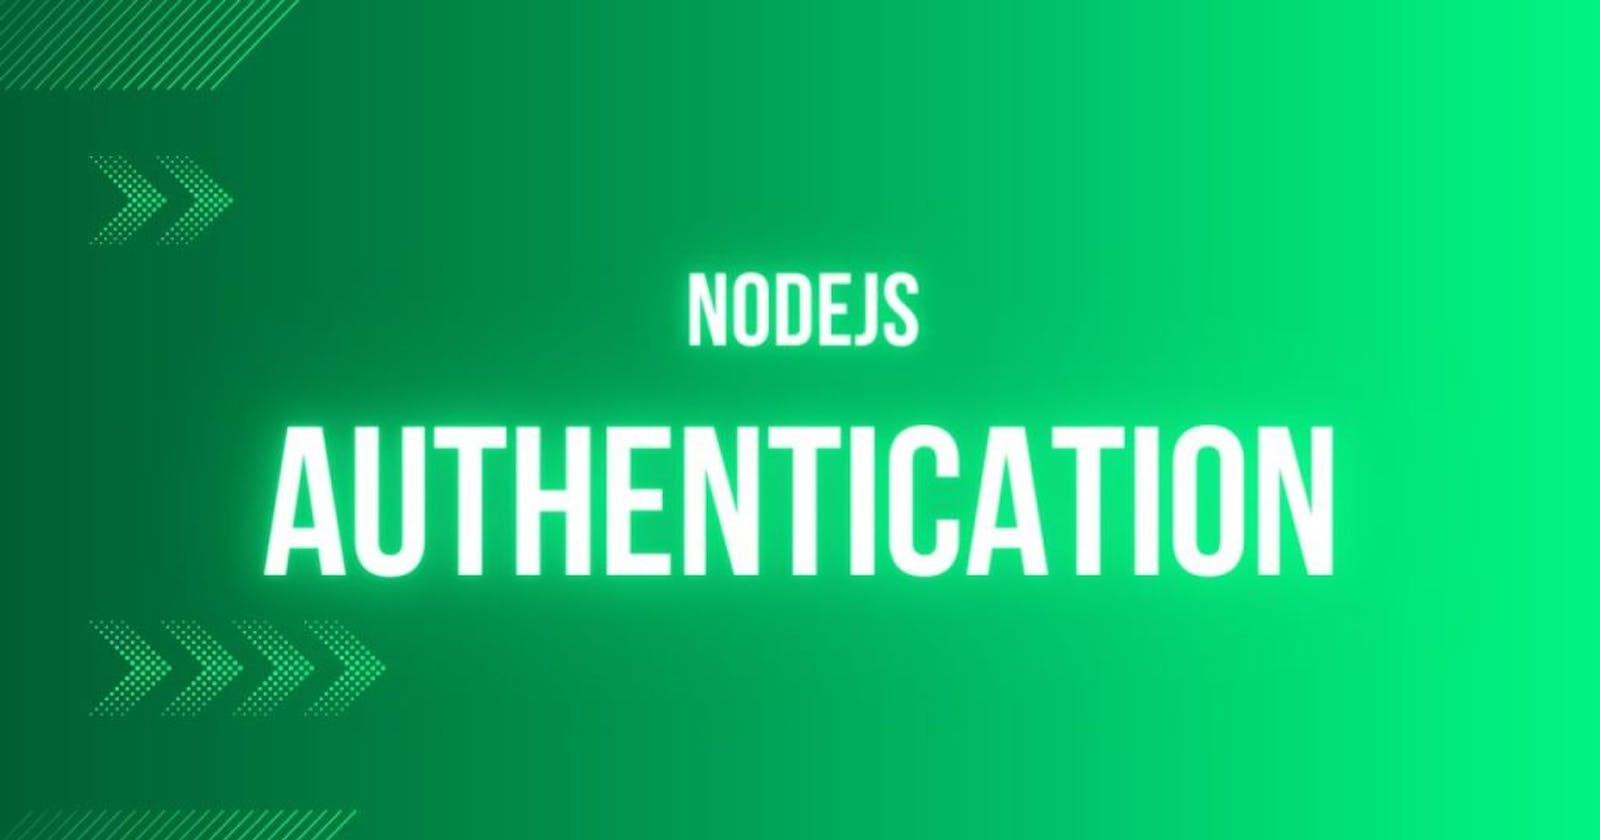 How to easily implement a user authentication system into your website